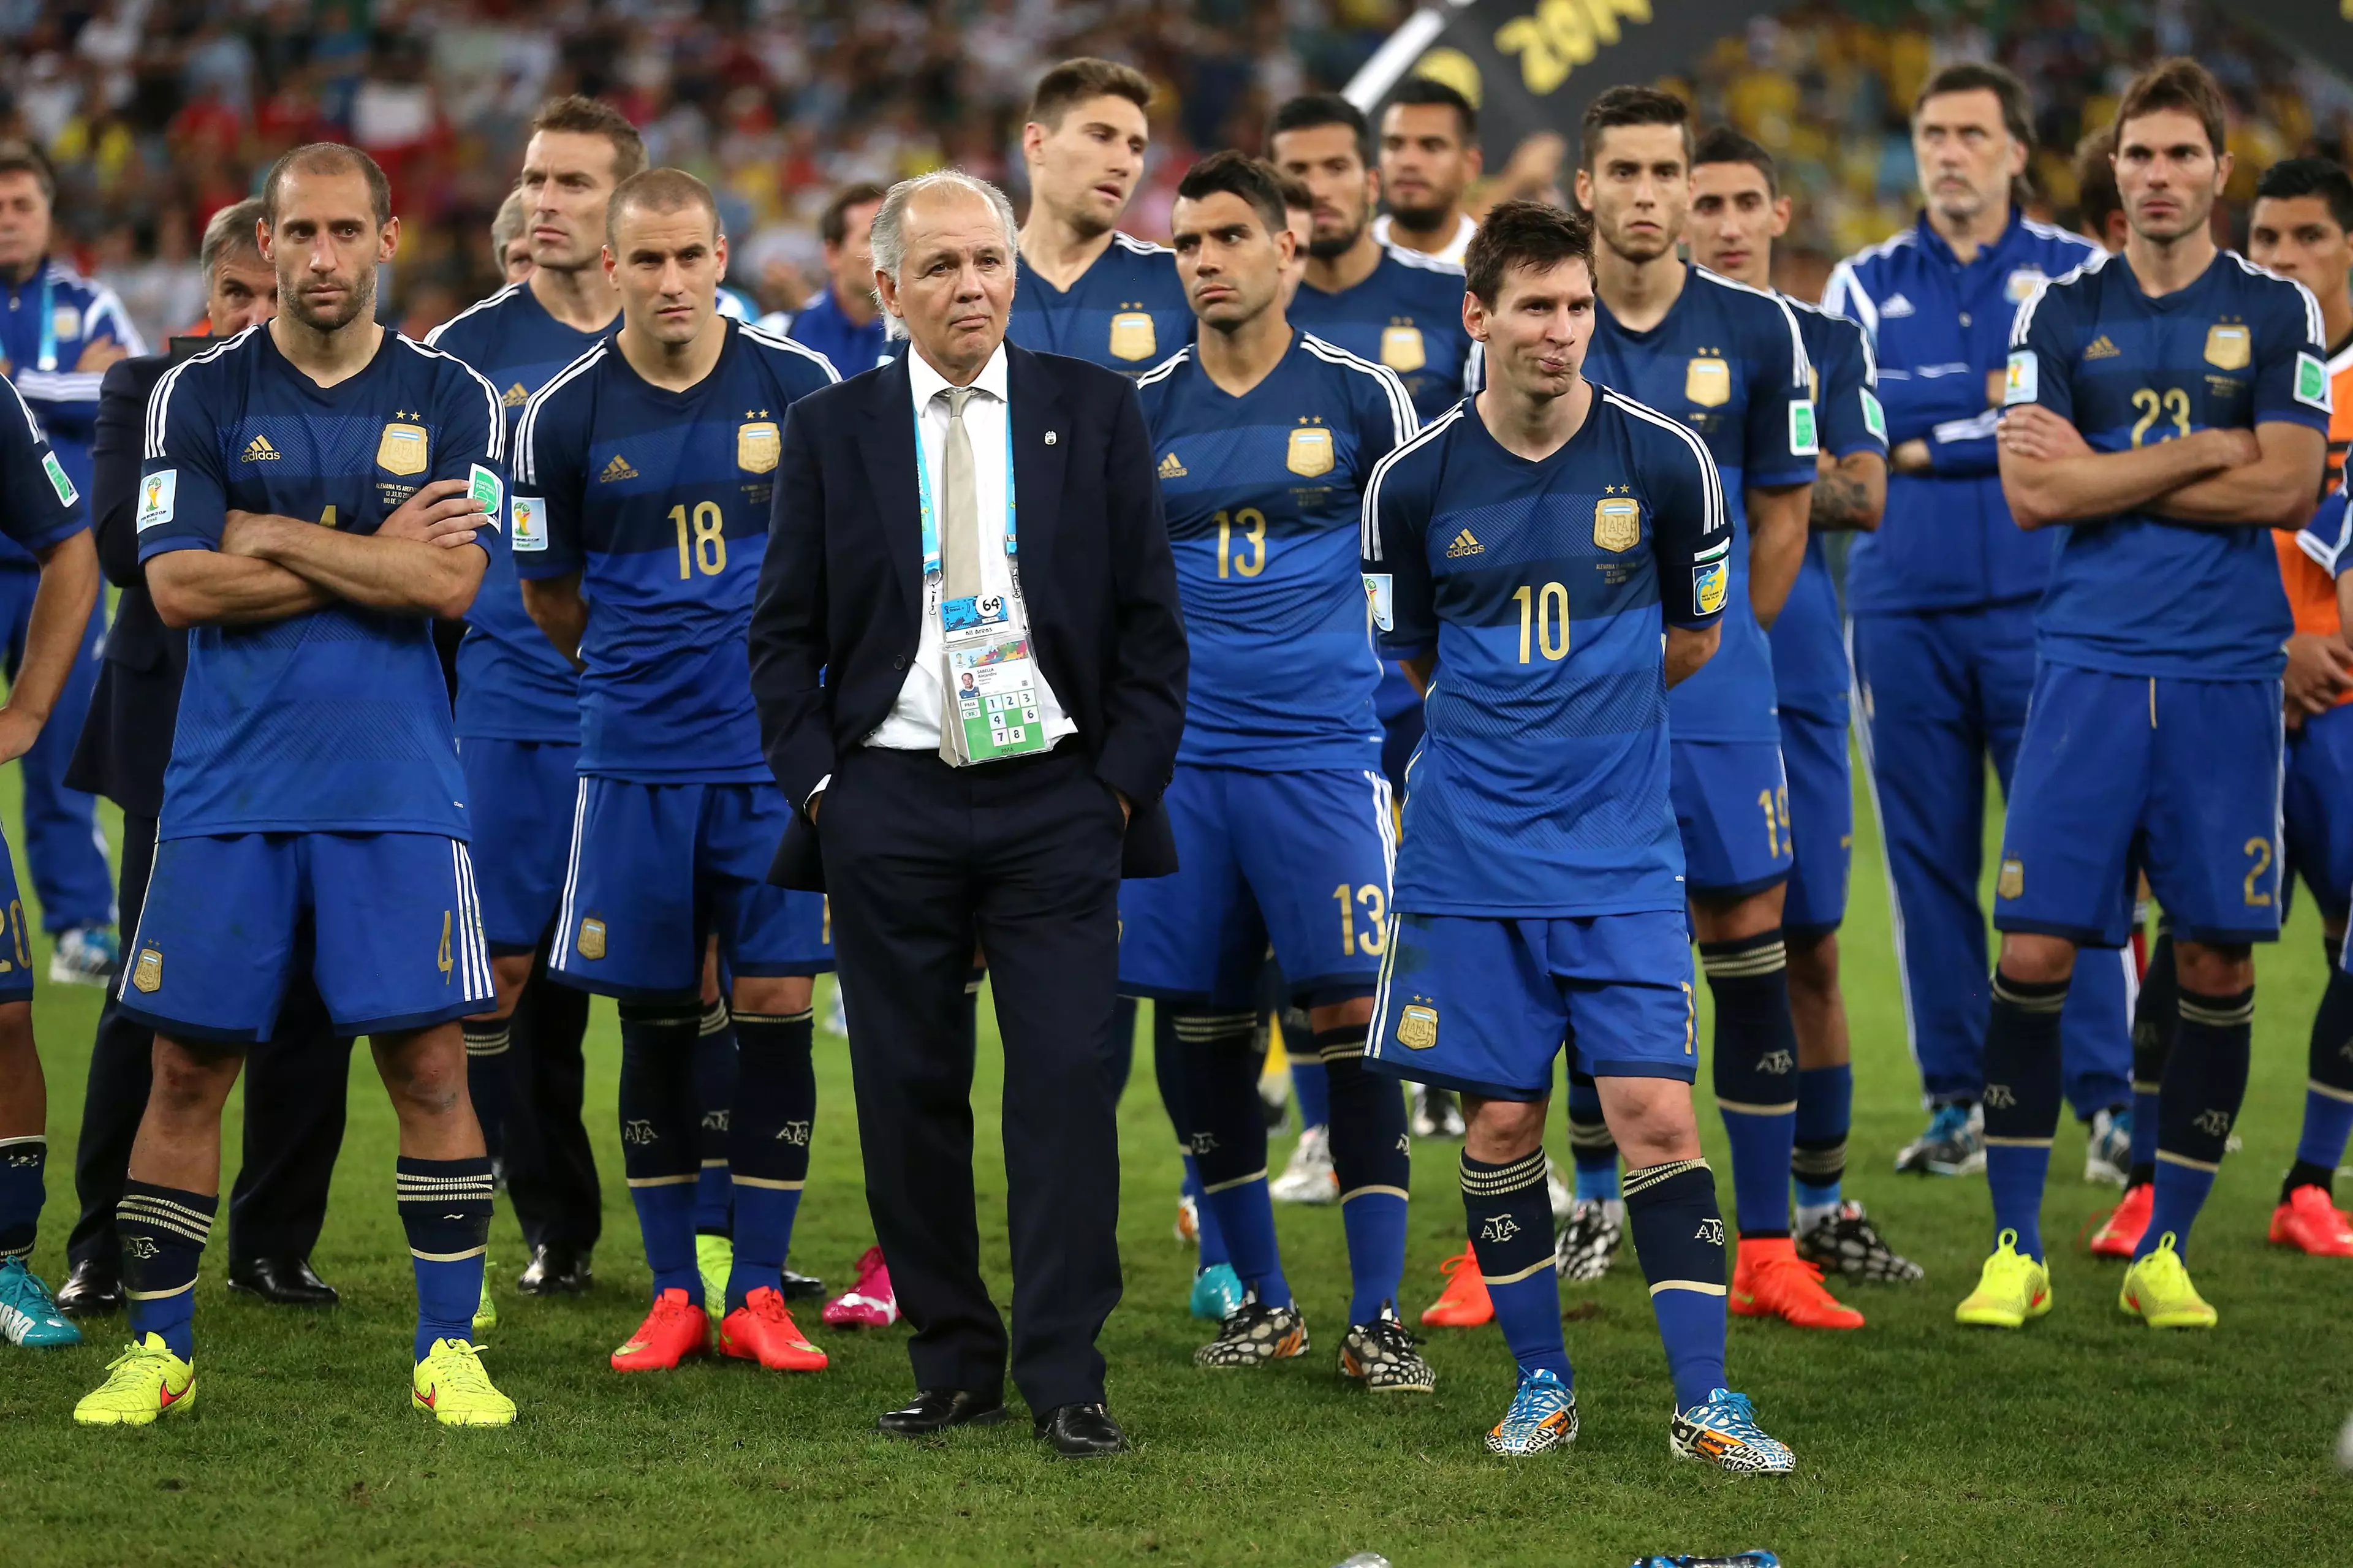 Messi cuts a dejected figure at the 2014 World Cup. Image: PA